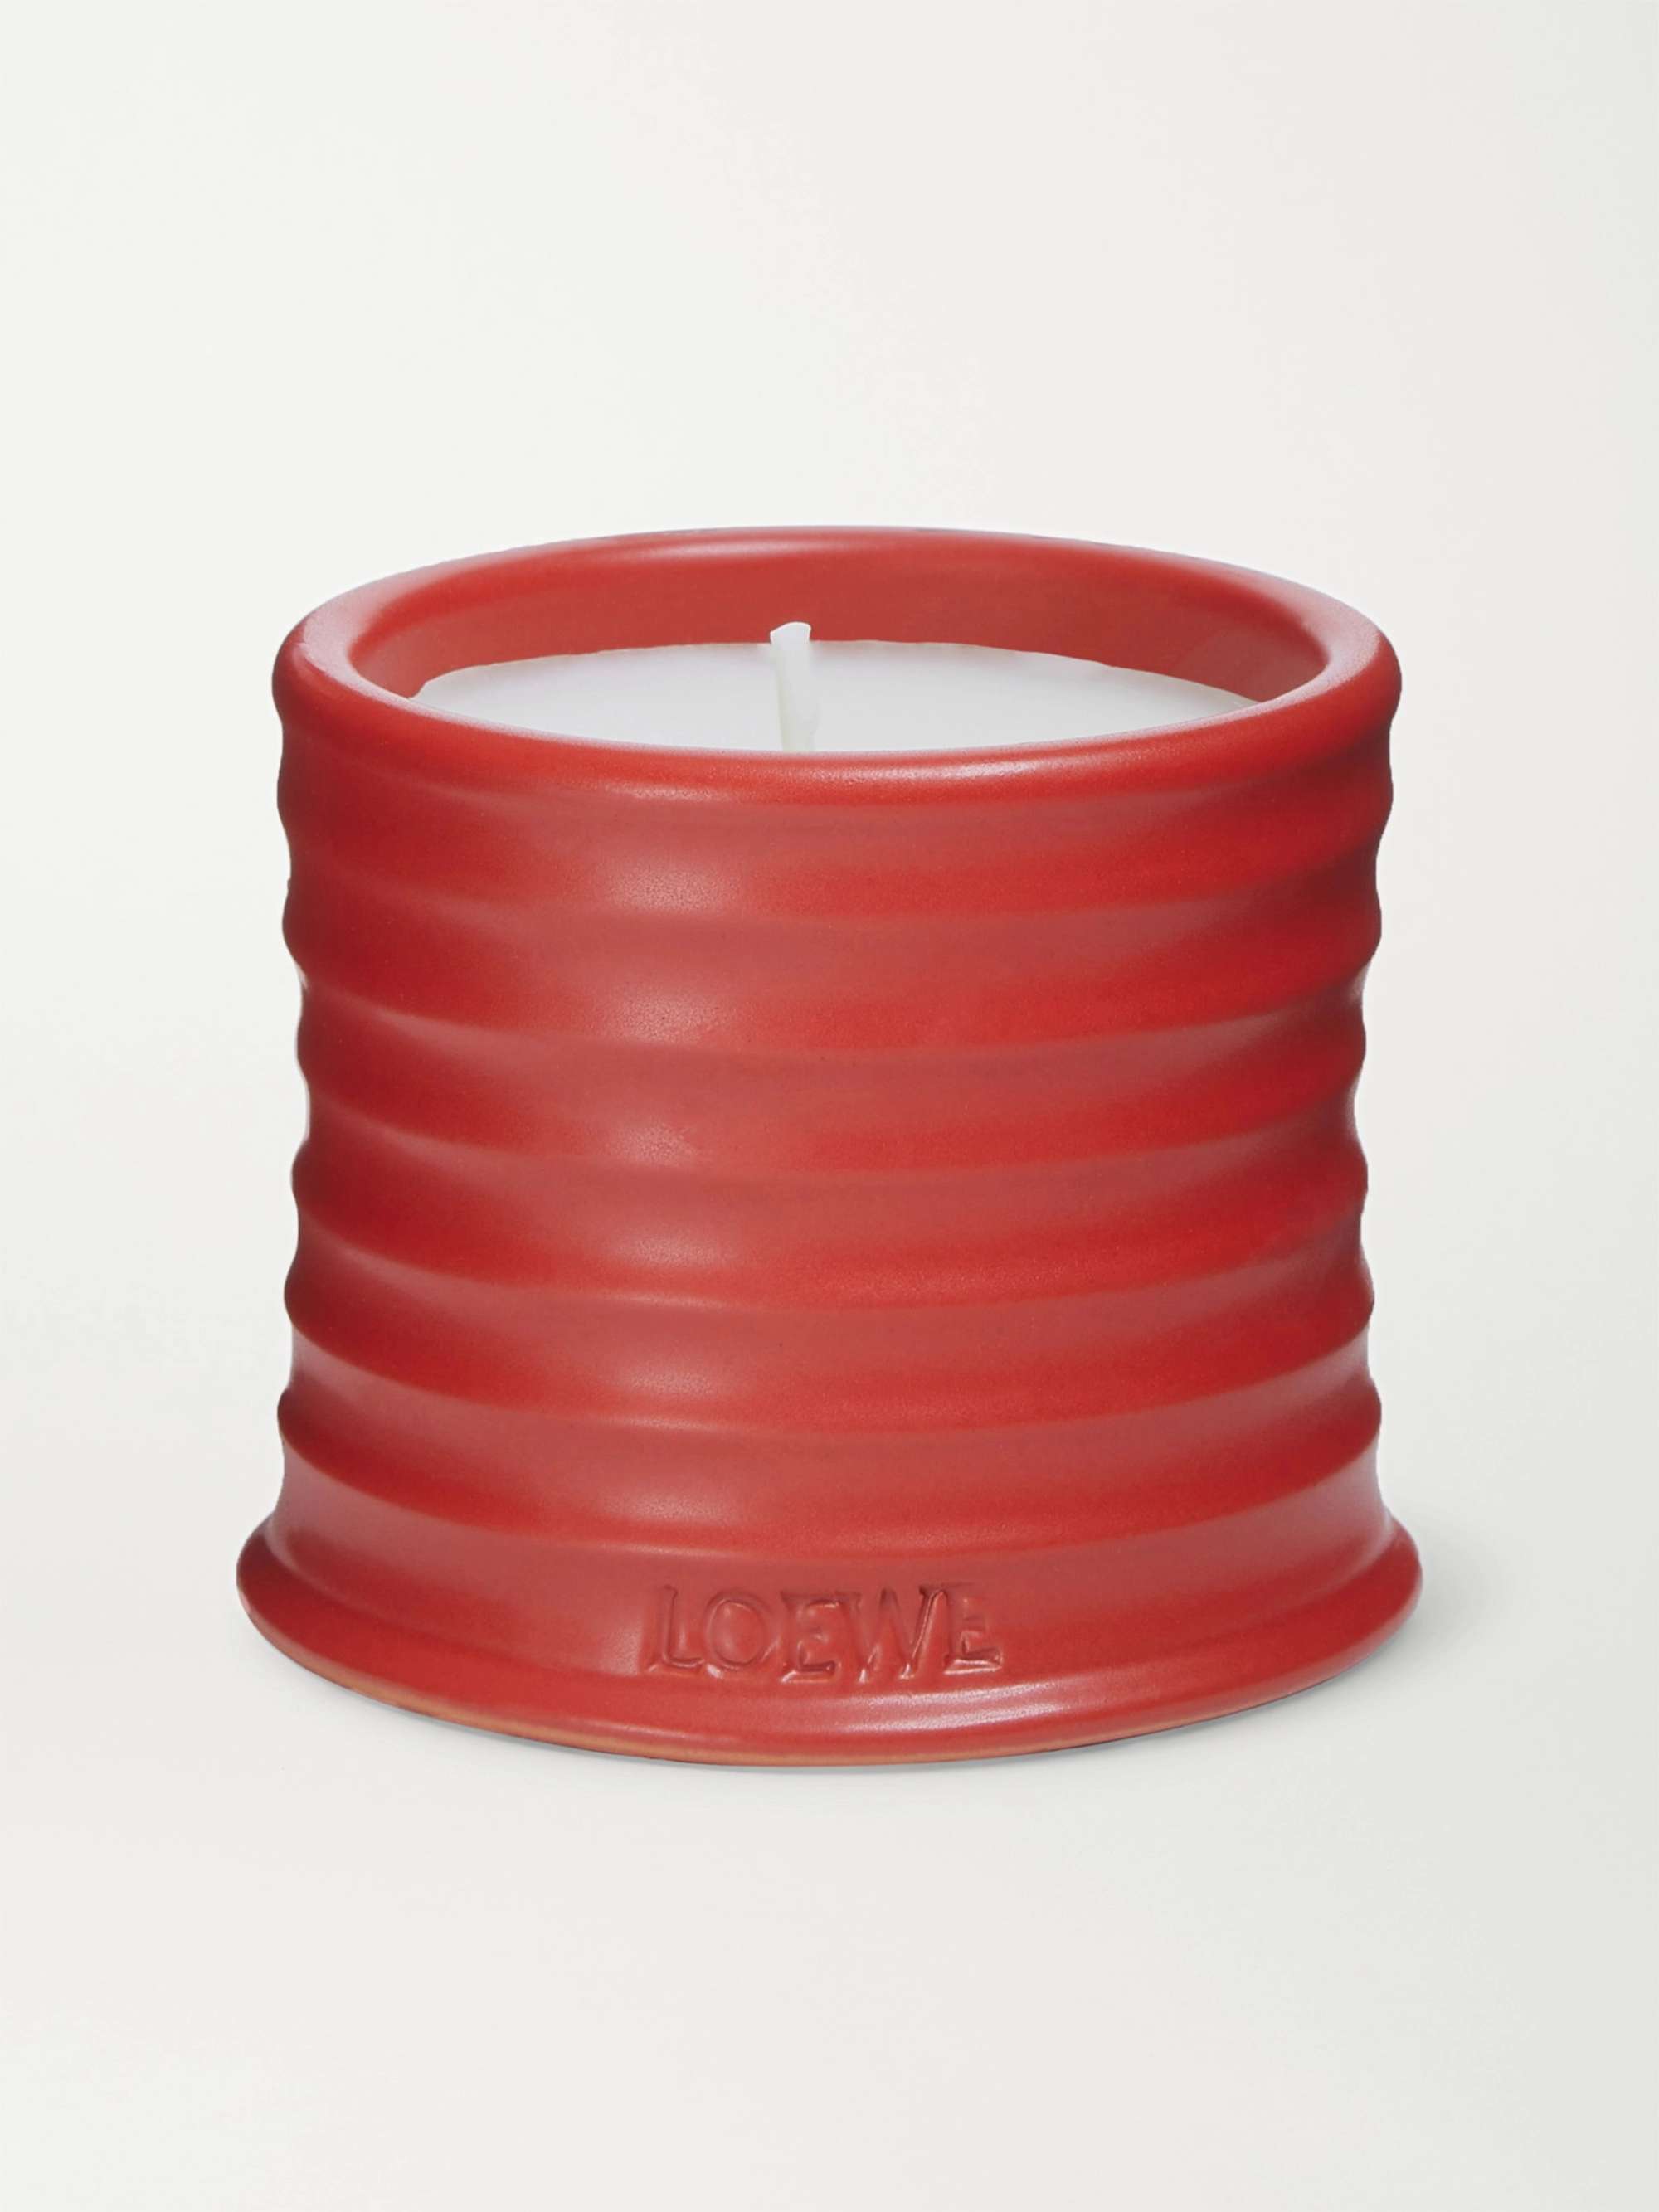 LOEWE HOME SCENTS Tomato Leaves Scented Candle, 170g